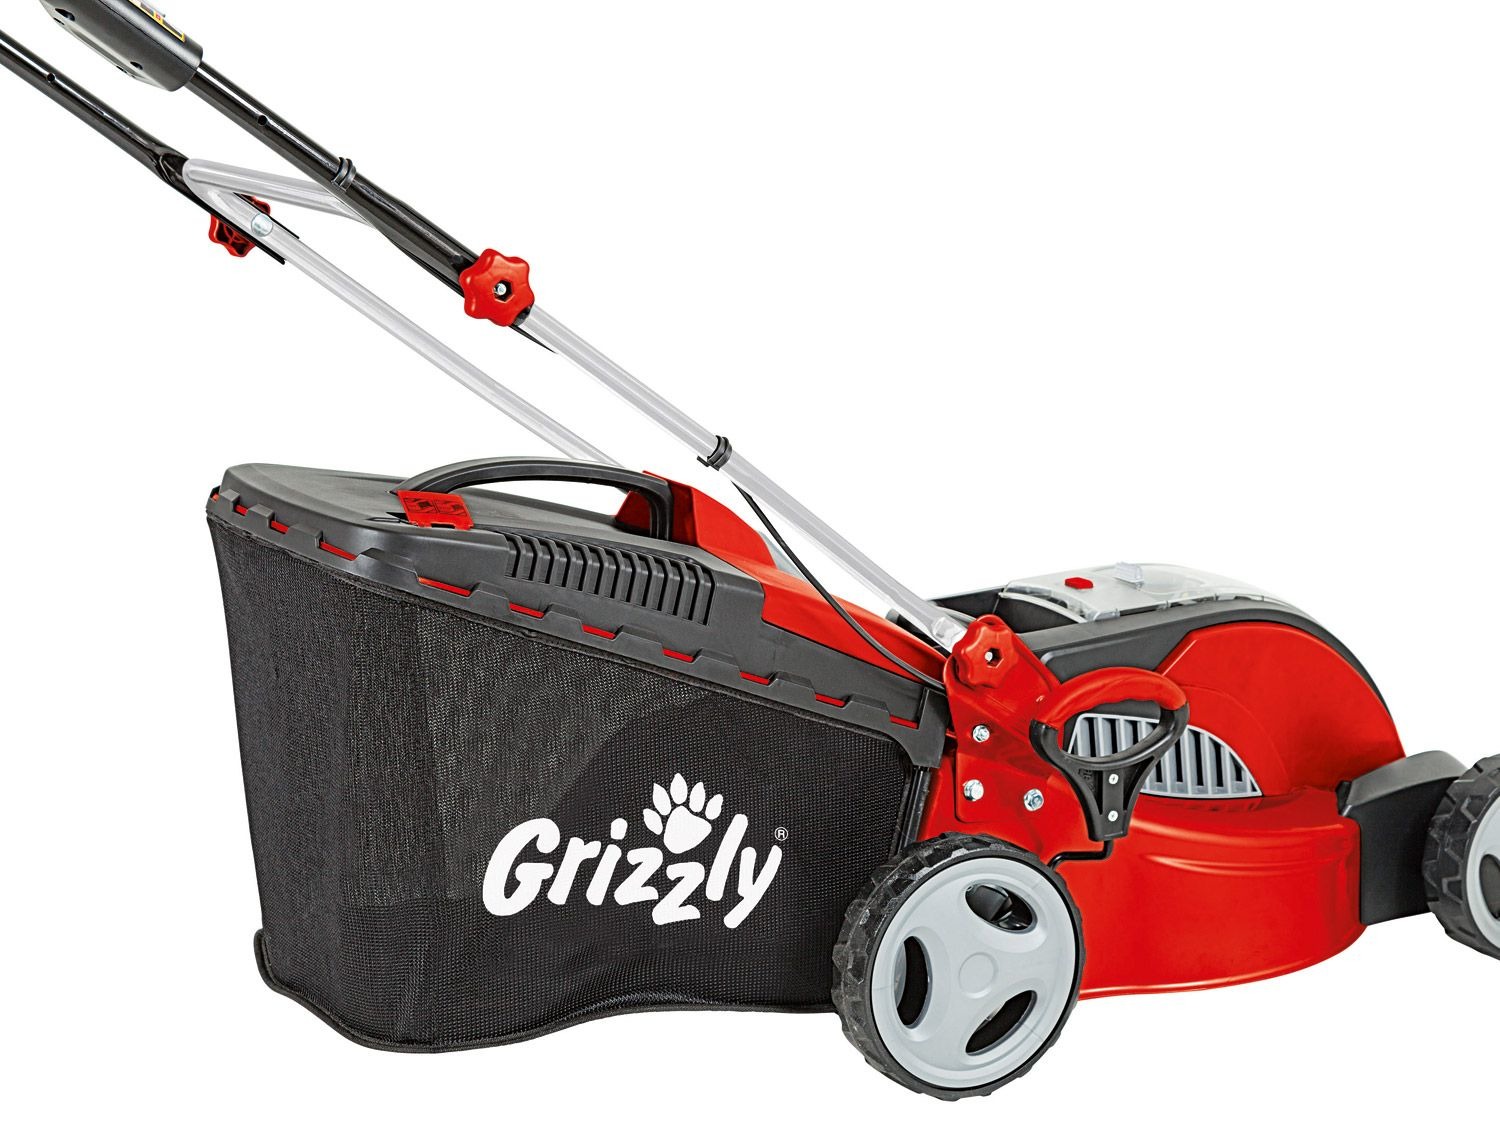 Grizzly grasmaaier ARM 4041 LIDL